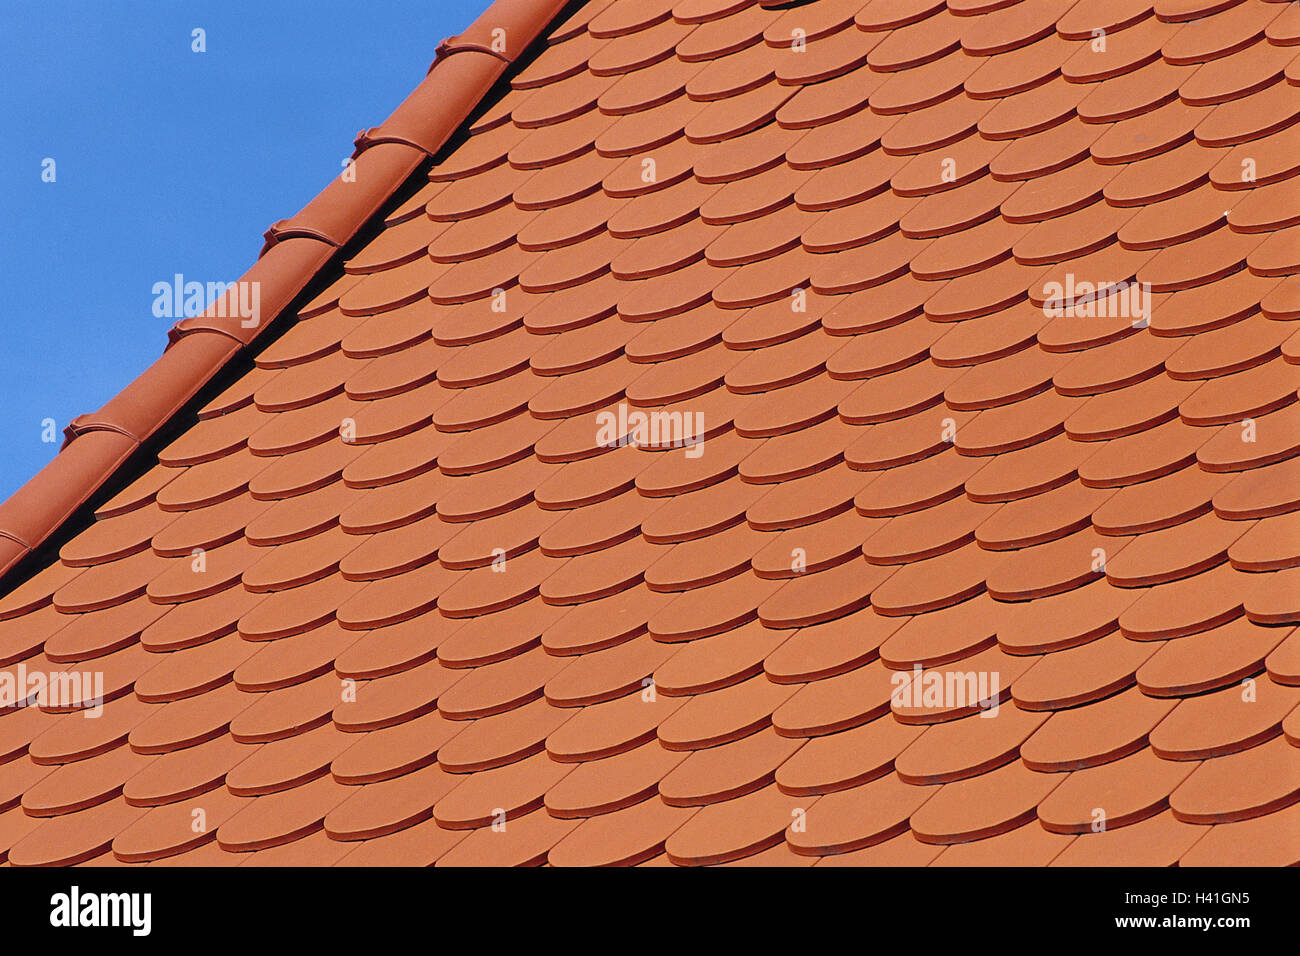 House roof, close up, beaver's tail clay brick, building, house, roof, roofing tile, shingle-like, roofing, detail Stock Photo